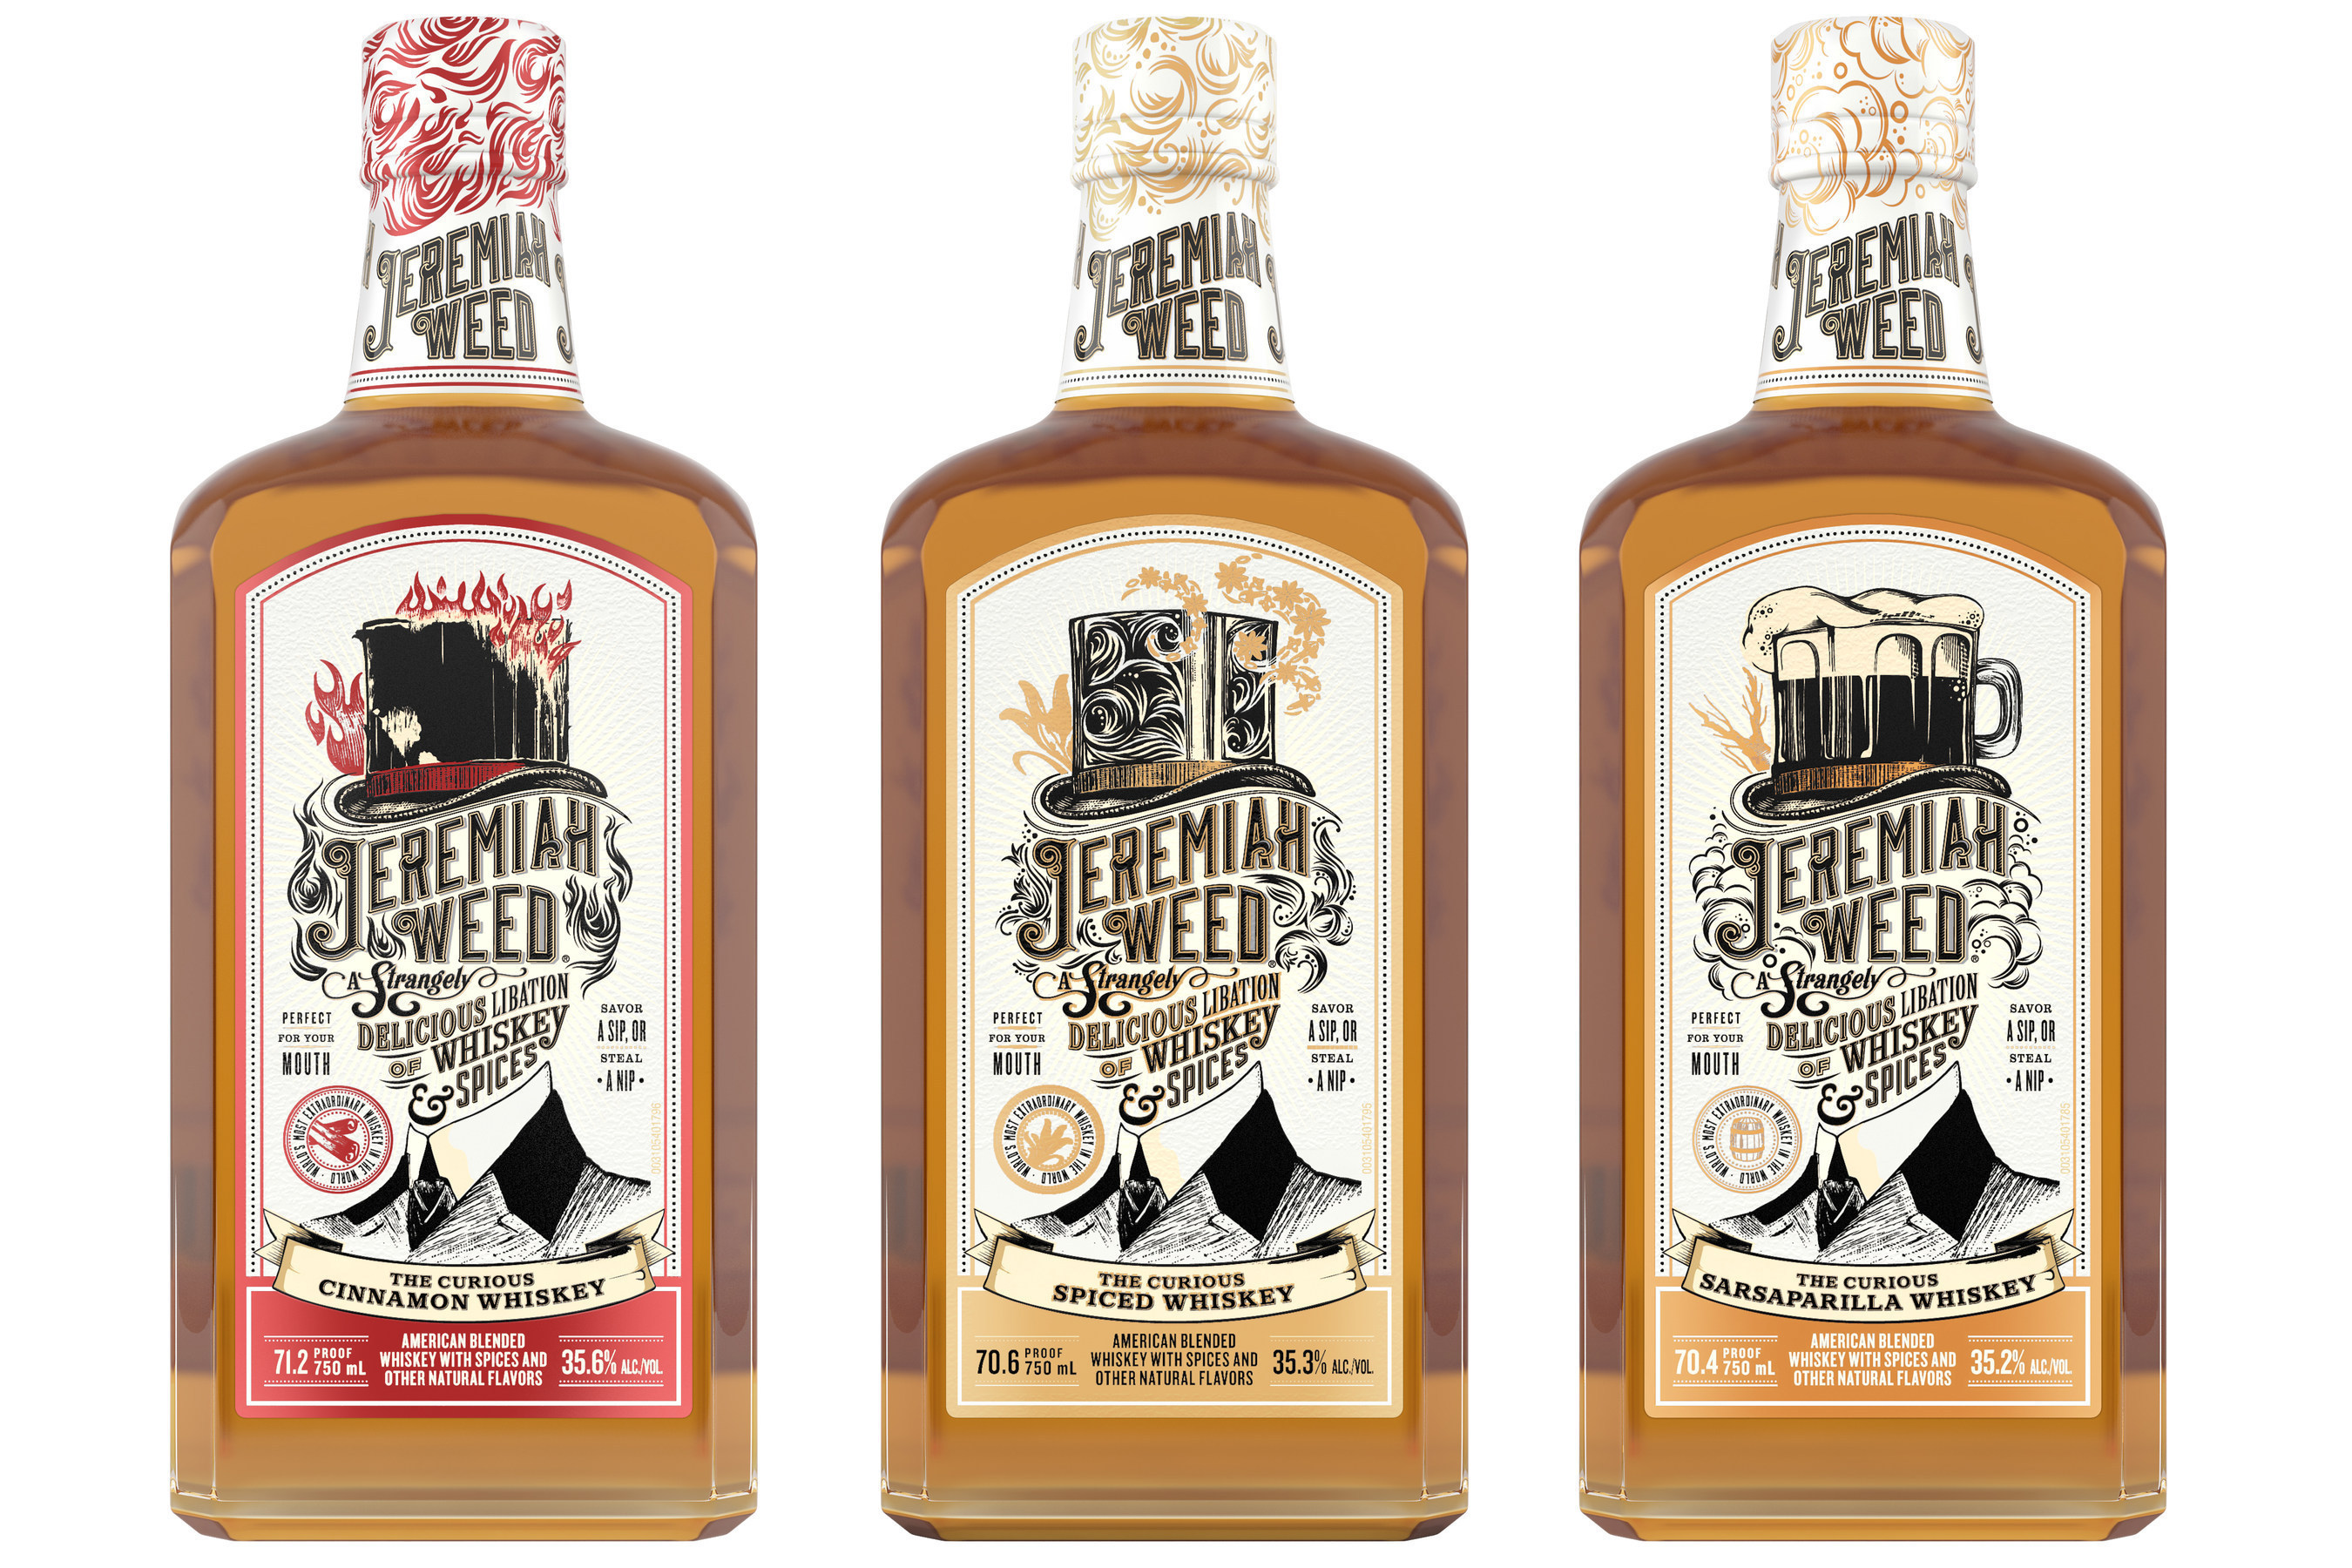 The makers of Jeremiah Weed unveil a new line of American whiskies blended with hand-selected secret spices and natural flavors. The releases include: Jeremiah Weed Spiced Whiskey, Jeremiah Weed Cinnamon Whiskey and Jeremiah Weed Sarsaparilla Whiskey.